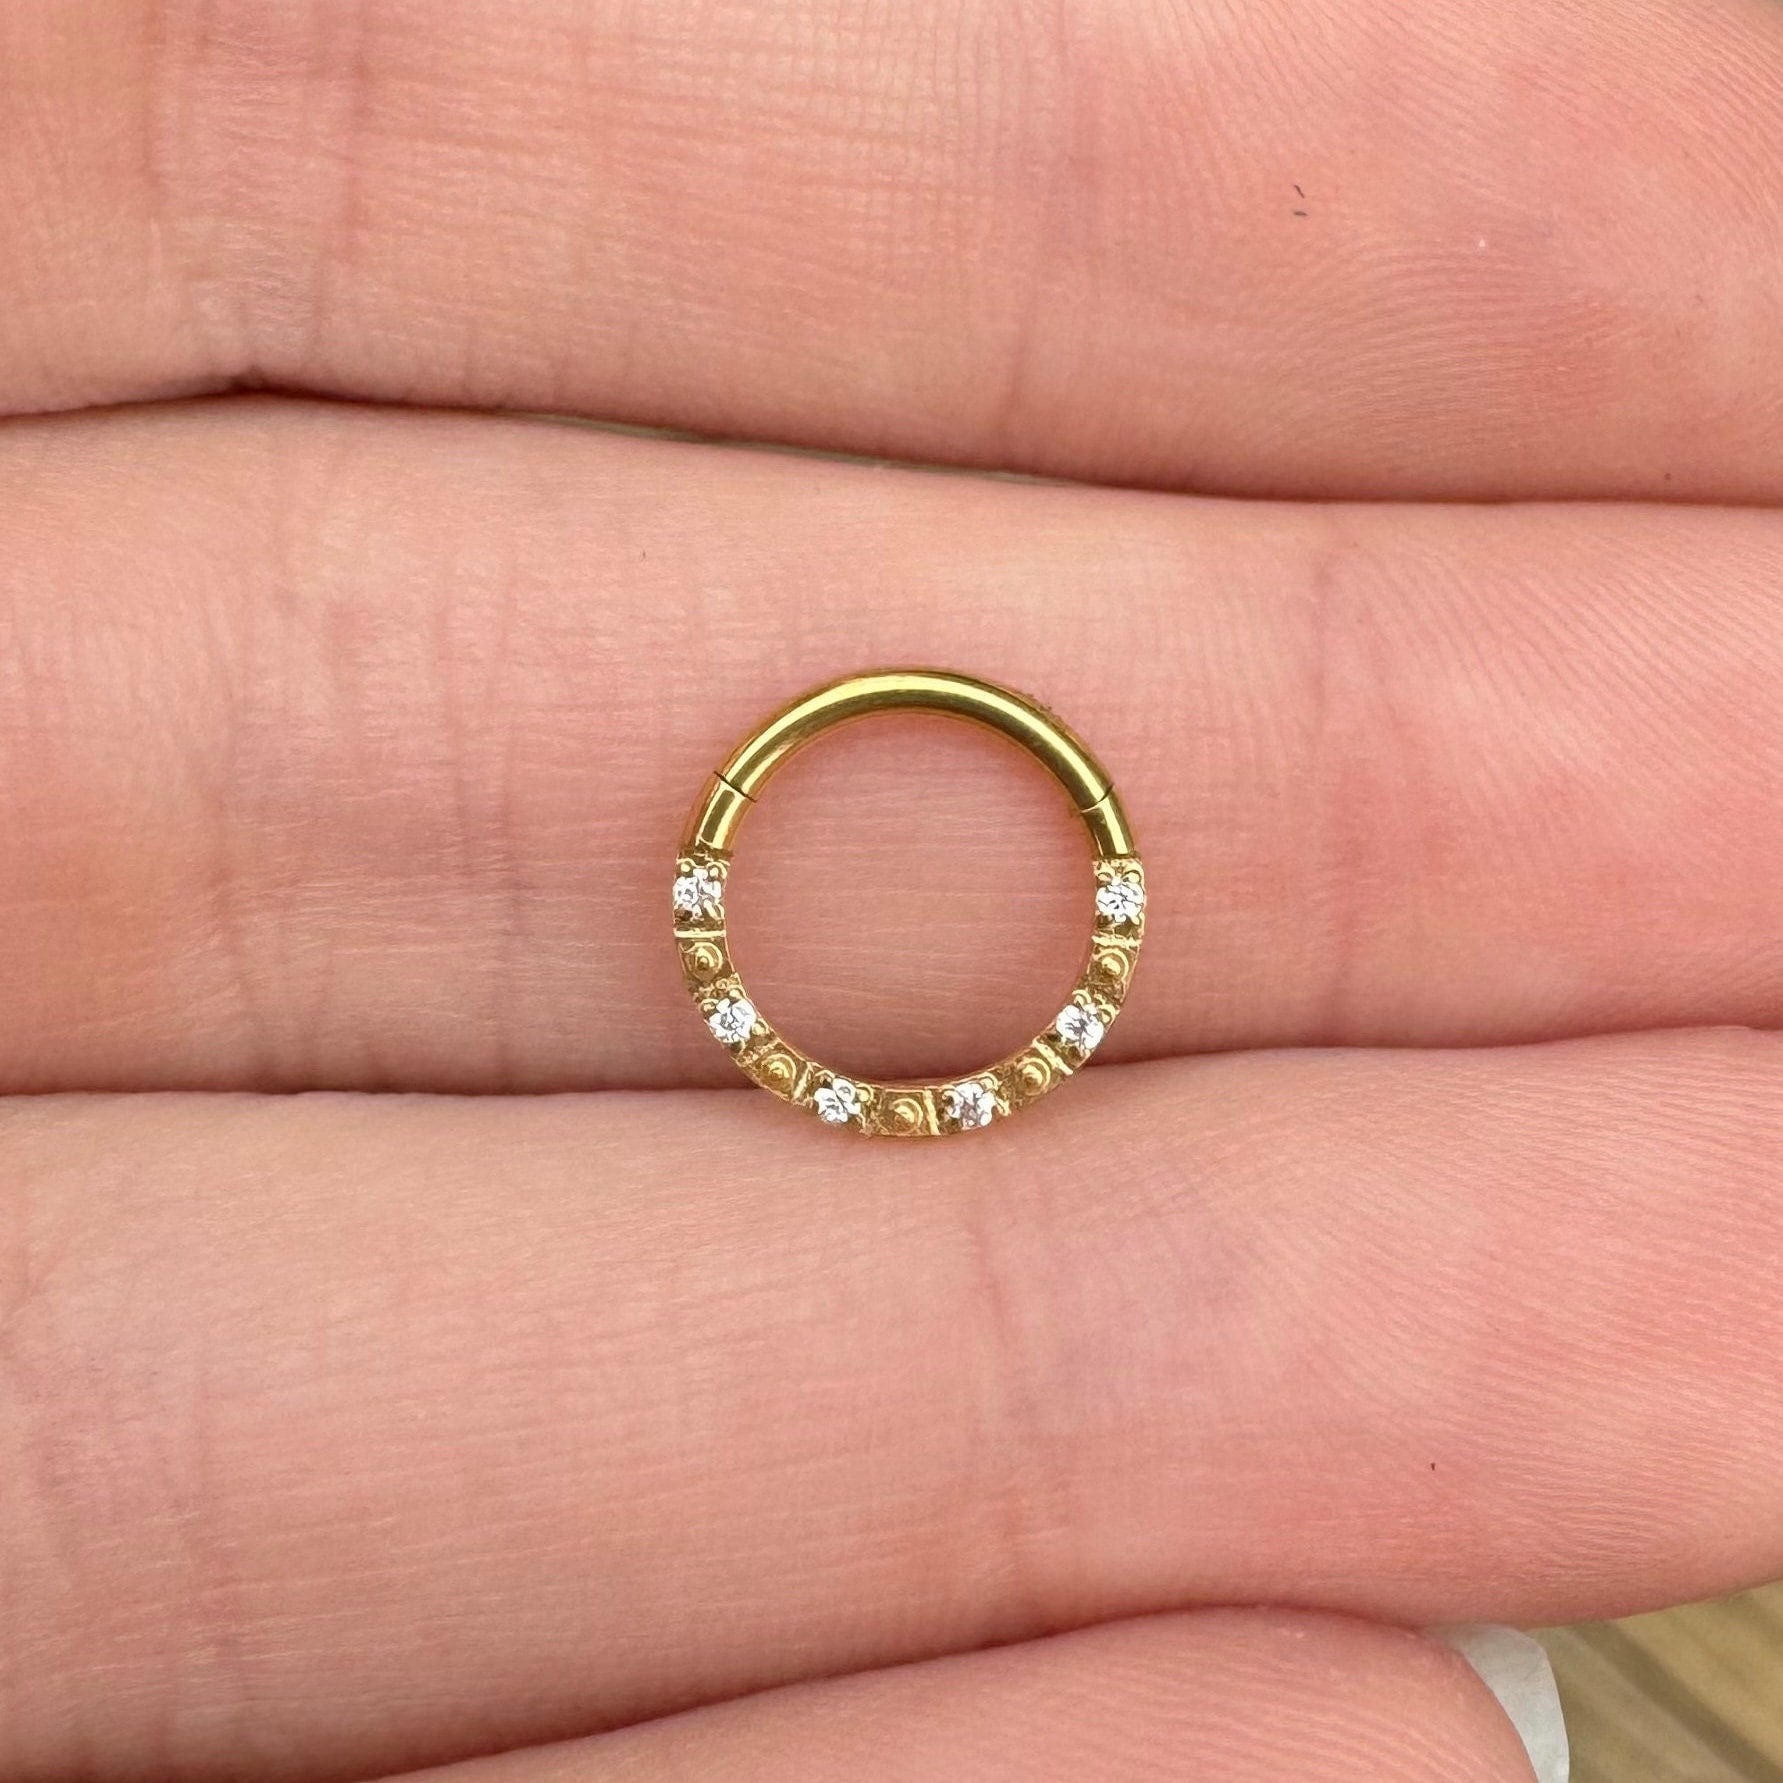 Gold Minimal Septum Ring (16G, 8mm, Surgical Steel, Gold or Silver)